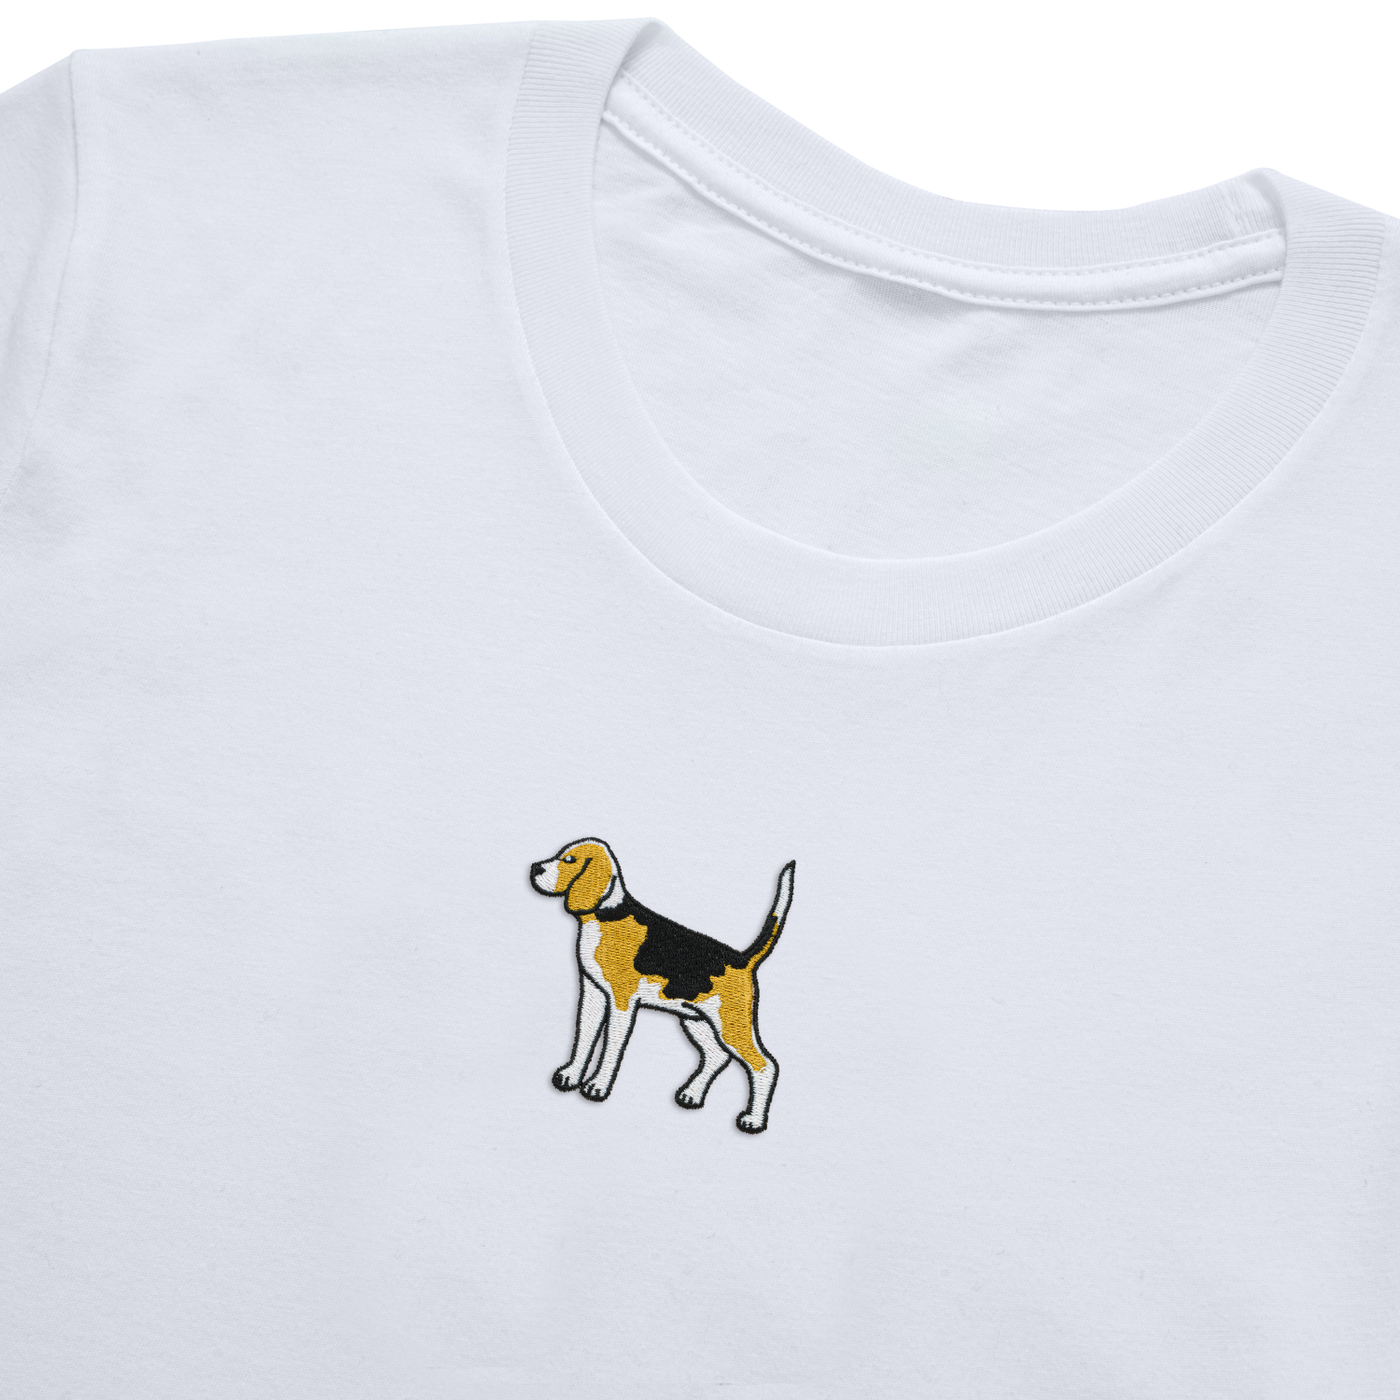 Bobby's Planet Women's Embroidered Beagle T-Shirt from Paws Dog Cat Animals Collection in White Color#color_white